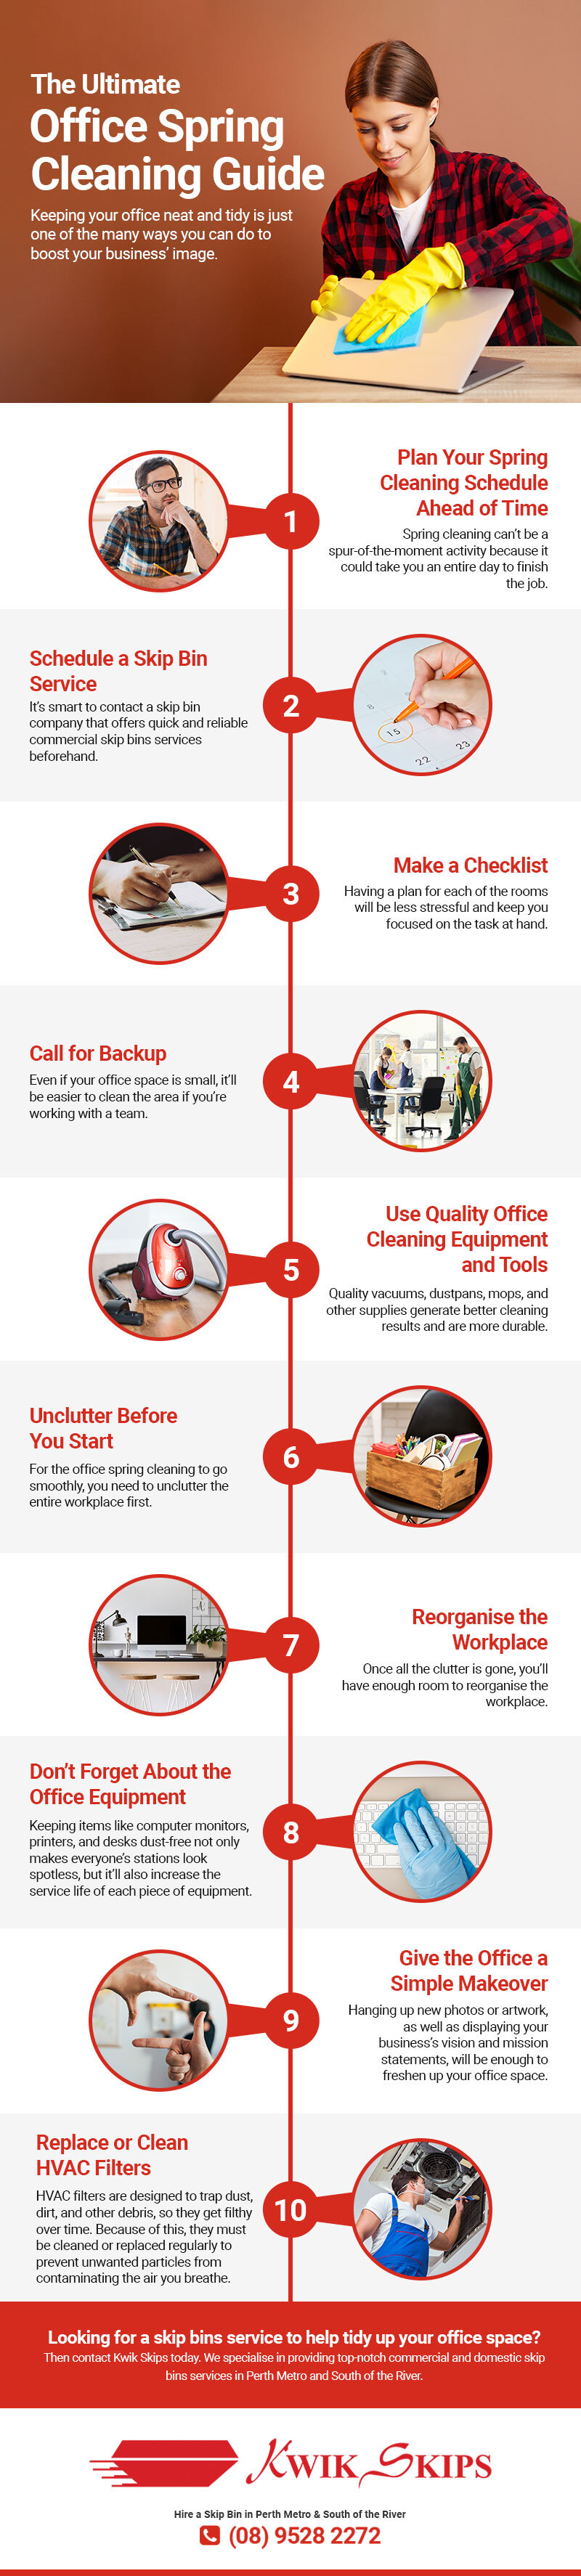 The Ultimate 2020 Office Spring Cleaning Guide | Kwik Skips